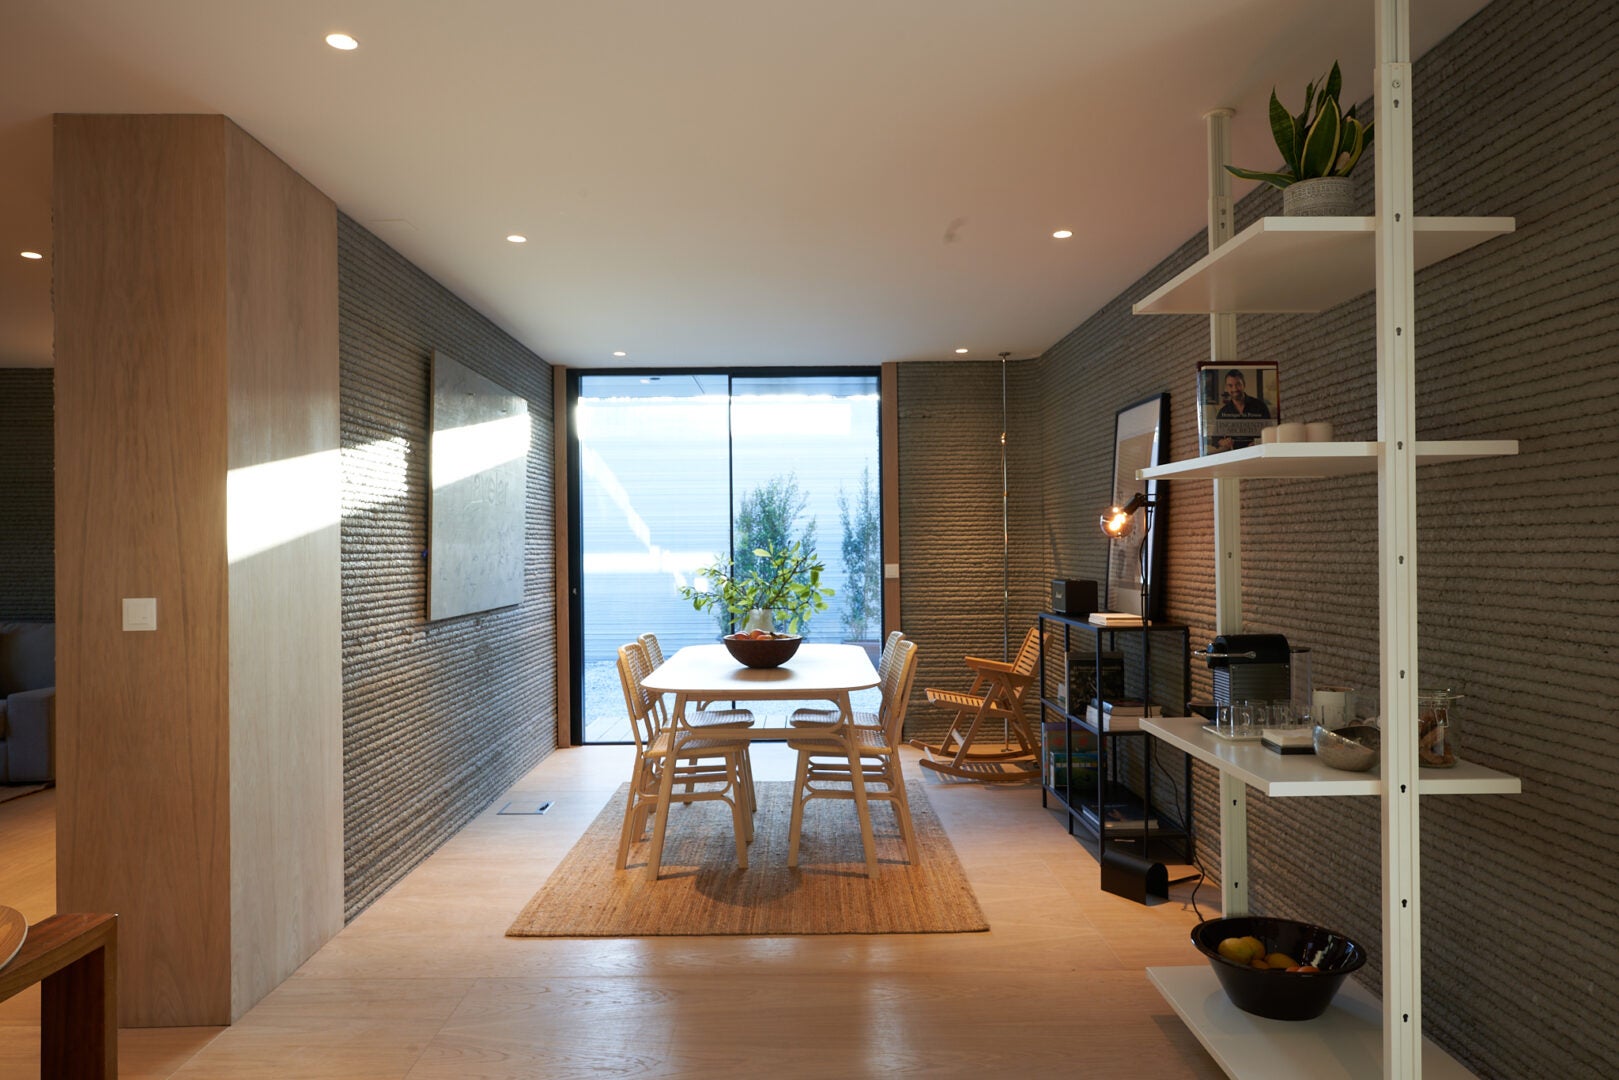 Interior of the Portugal's First 3D Printed House